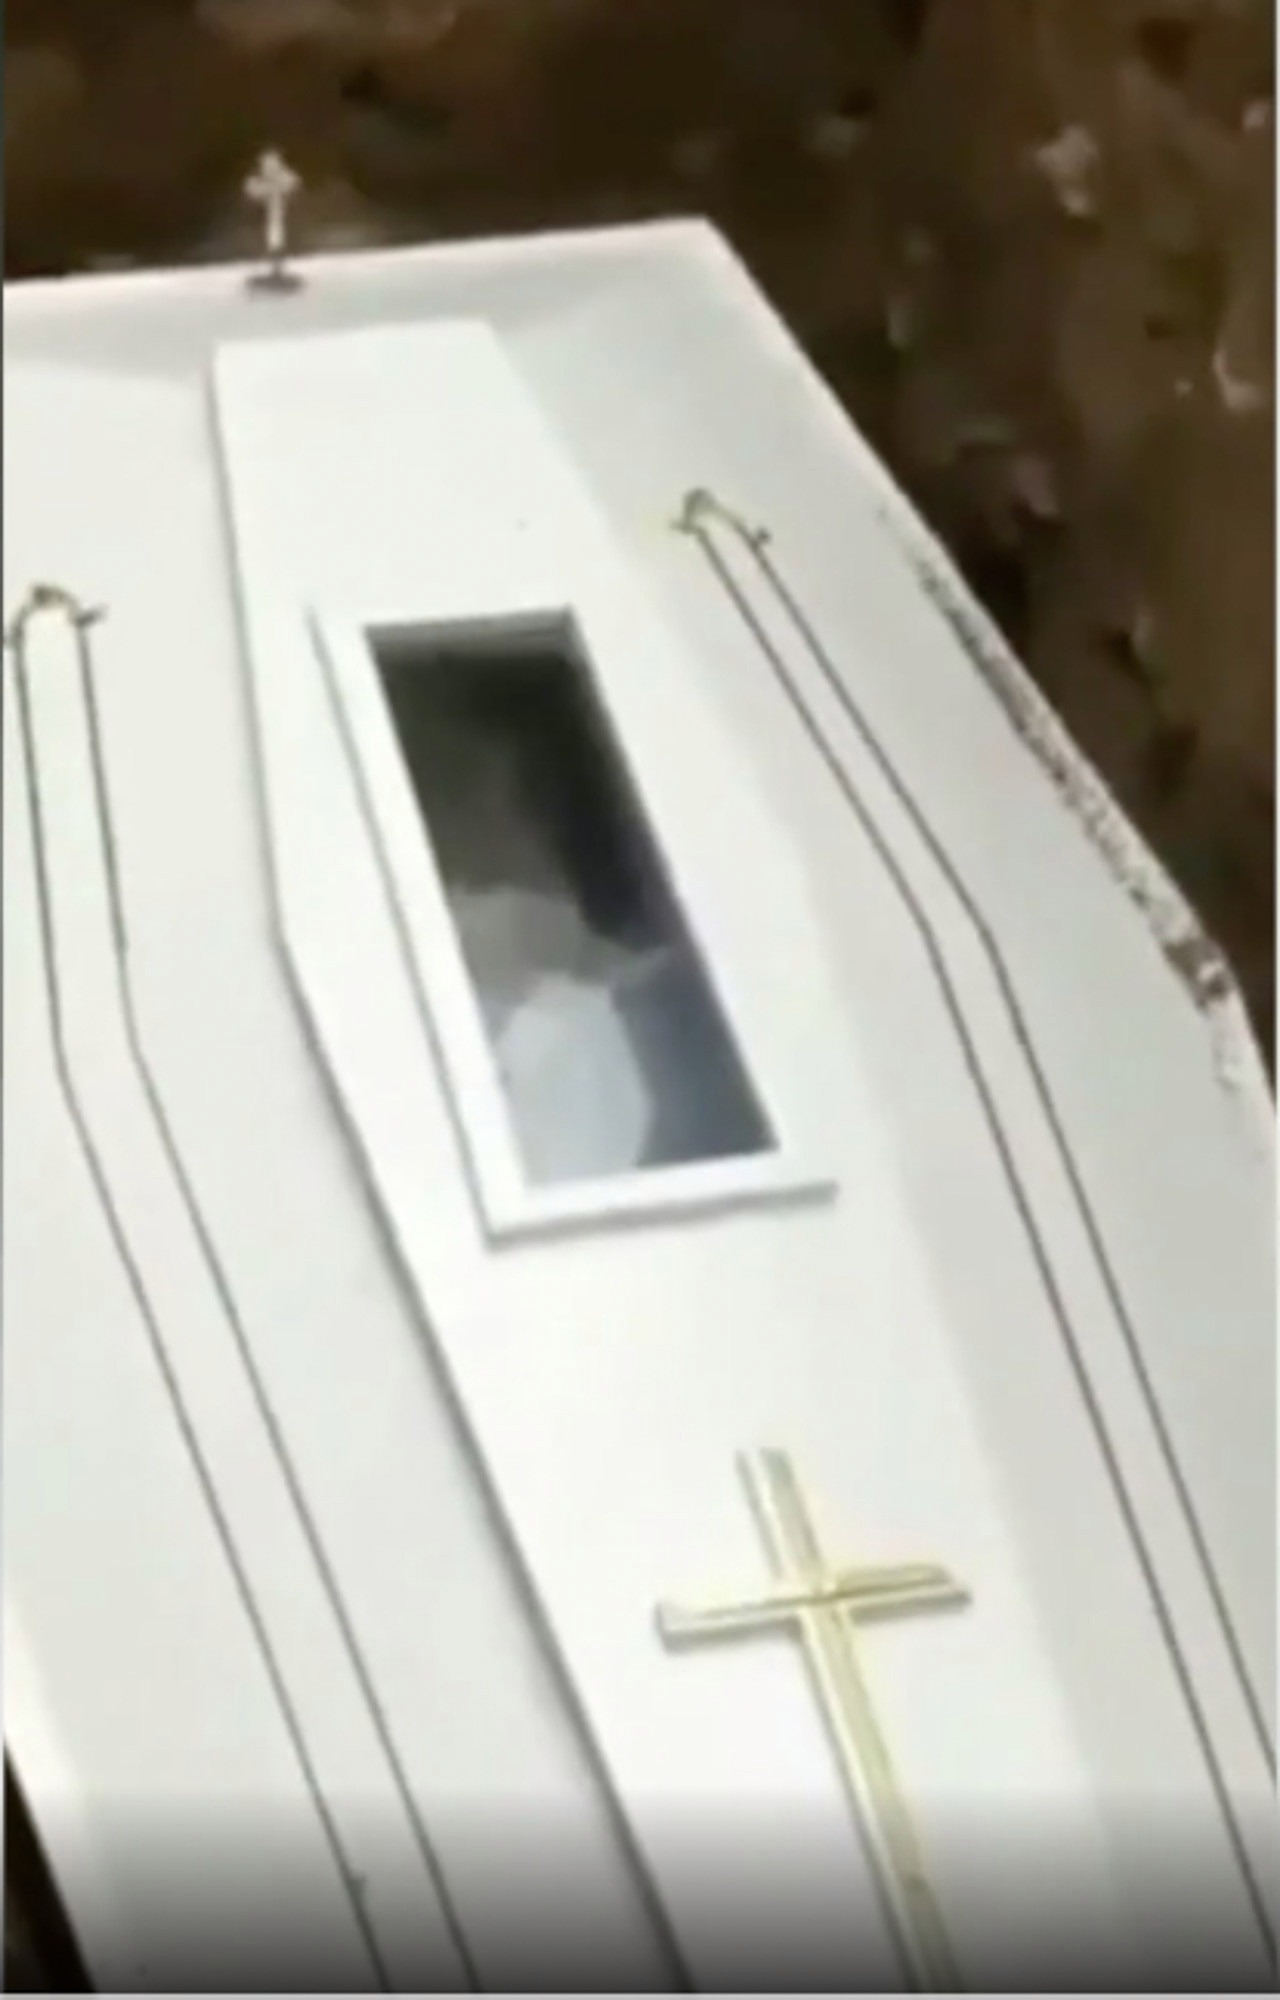 Corpse waves from inside a coffin in Indonesia, video goes viral